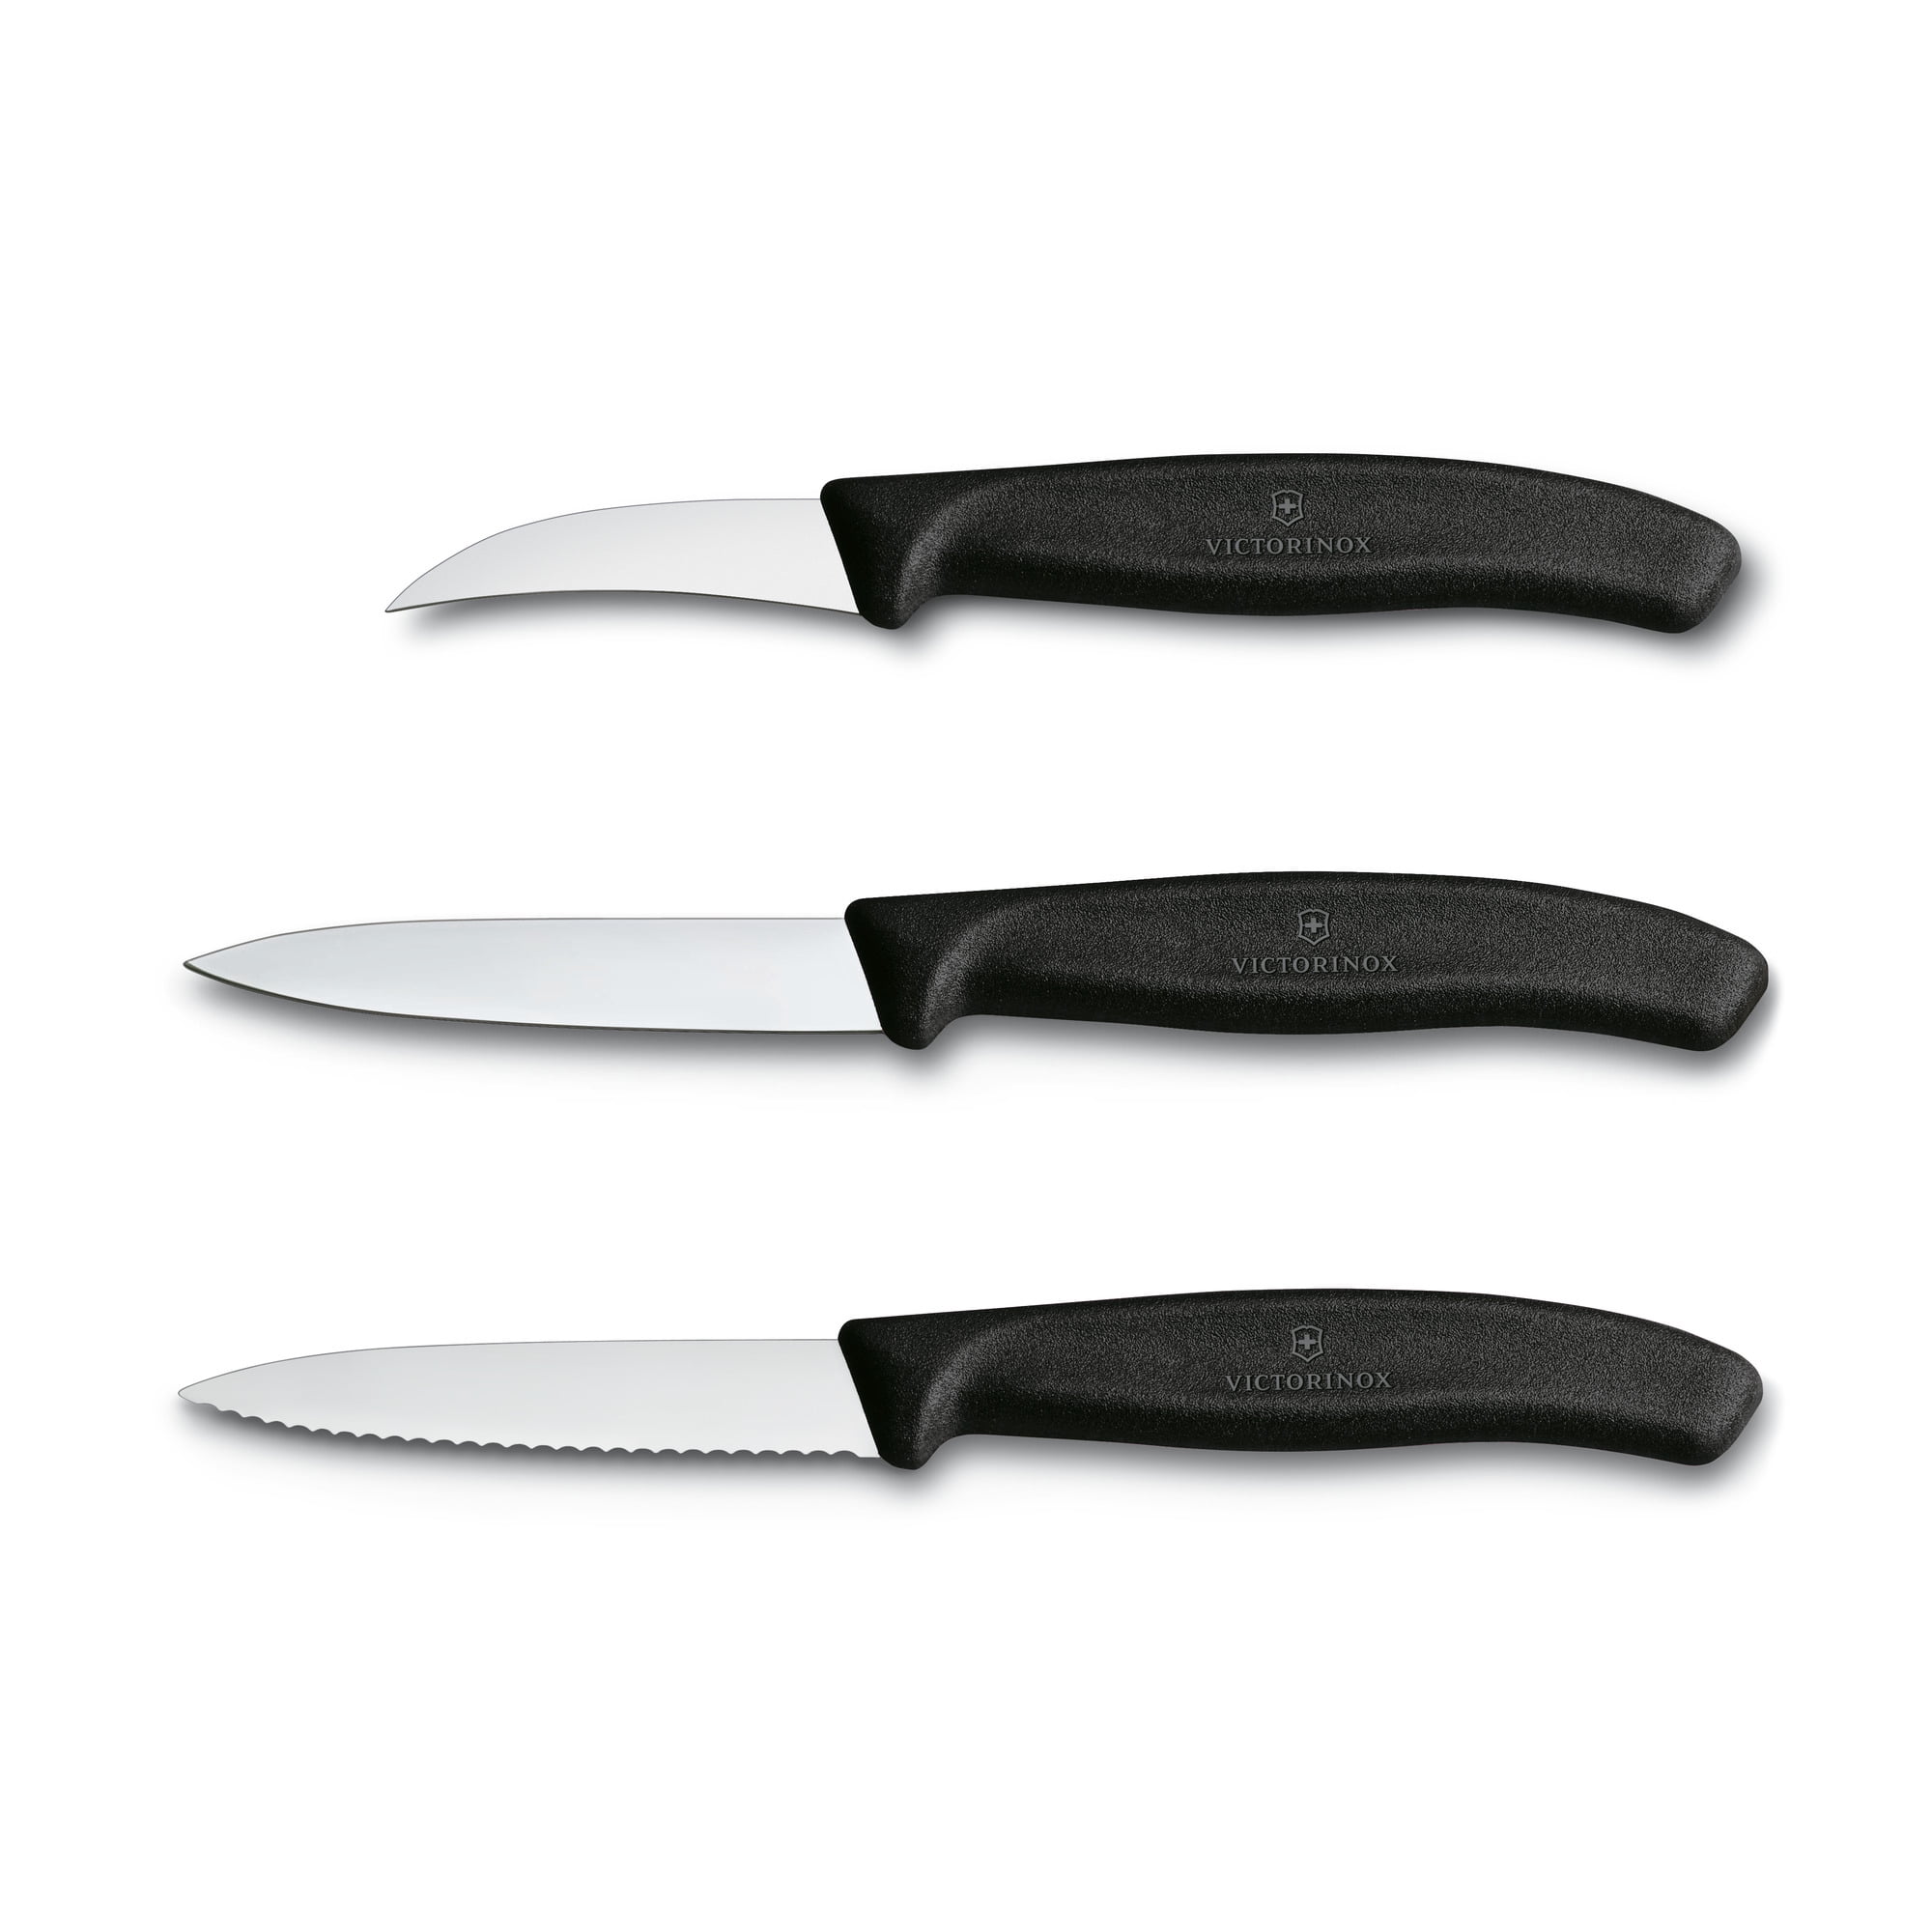 Starfrit Paring Set of 4 Knives with Covers - 20356657